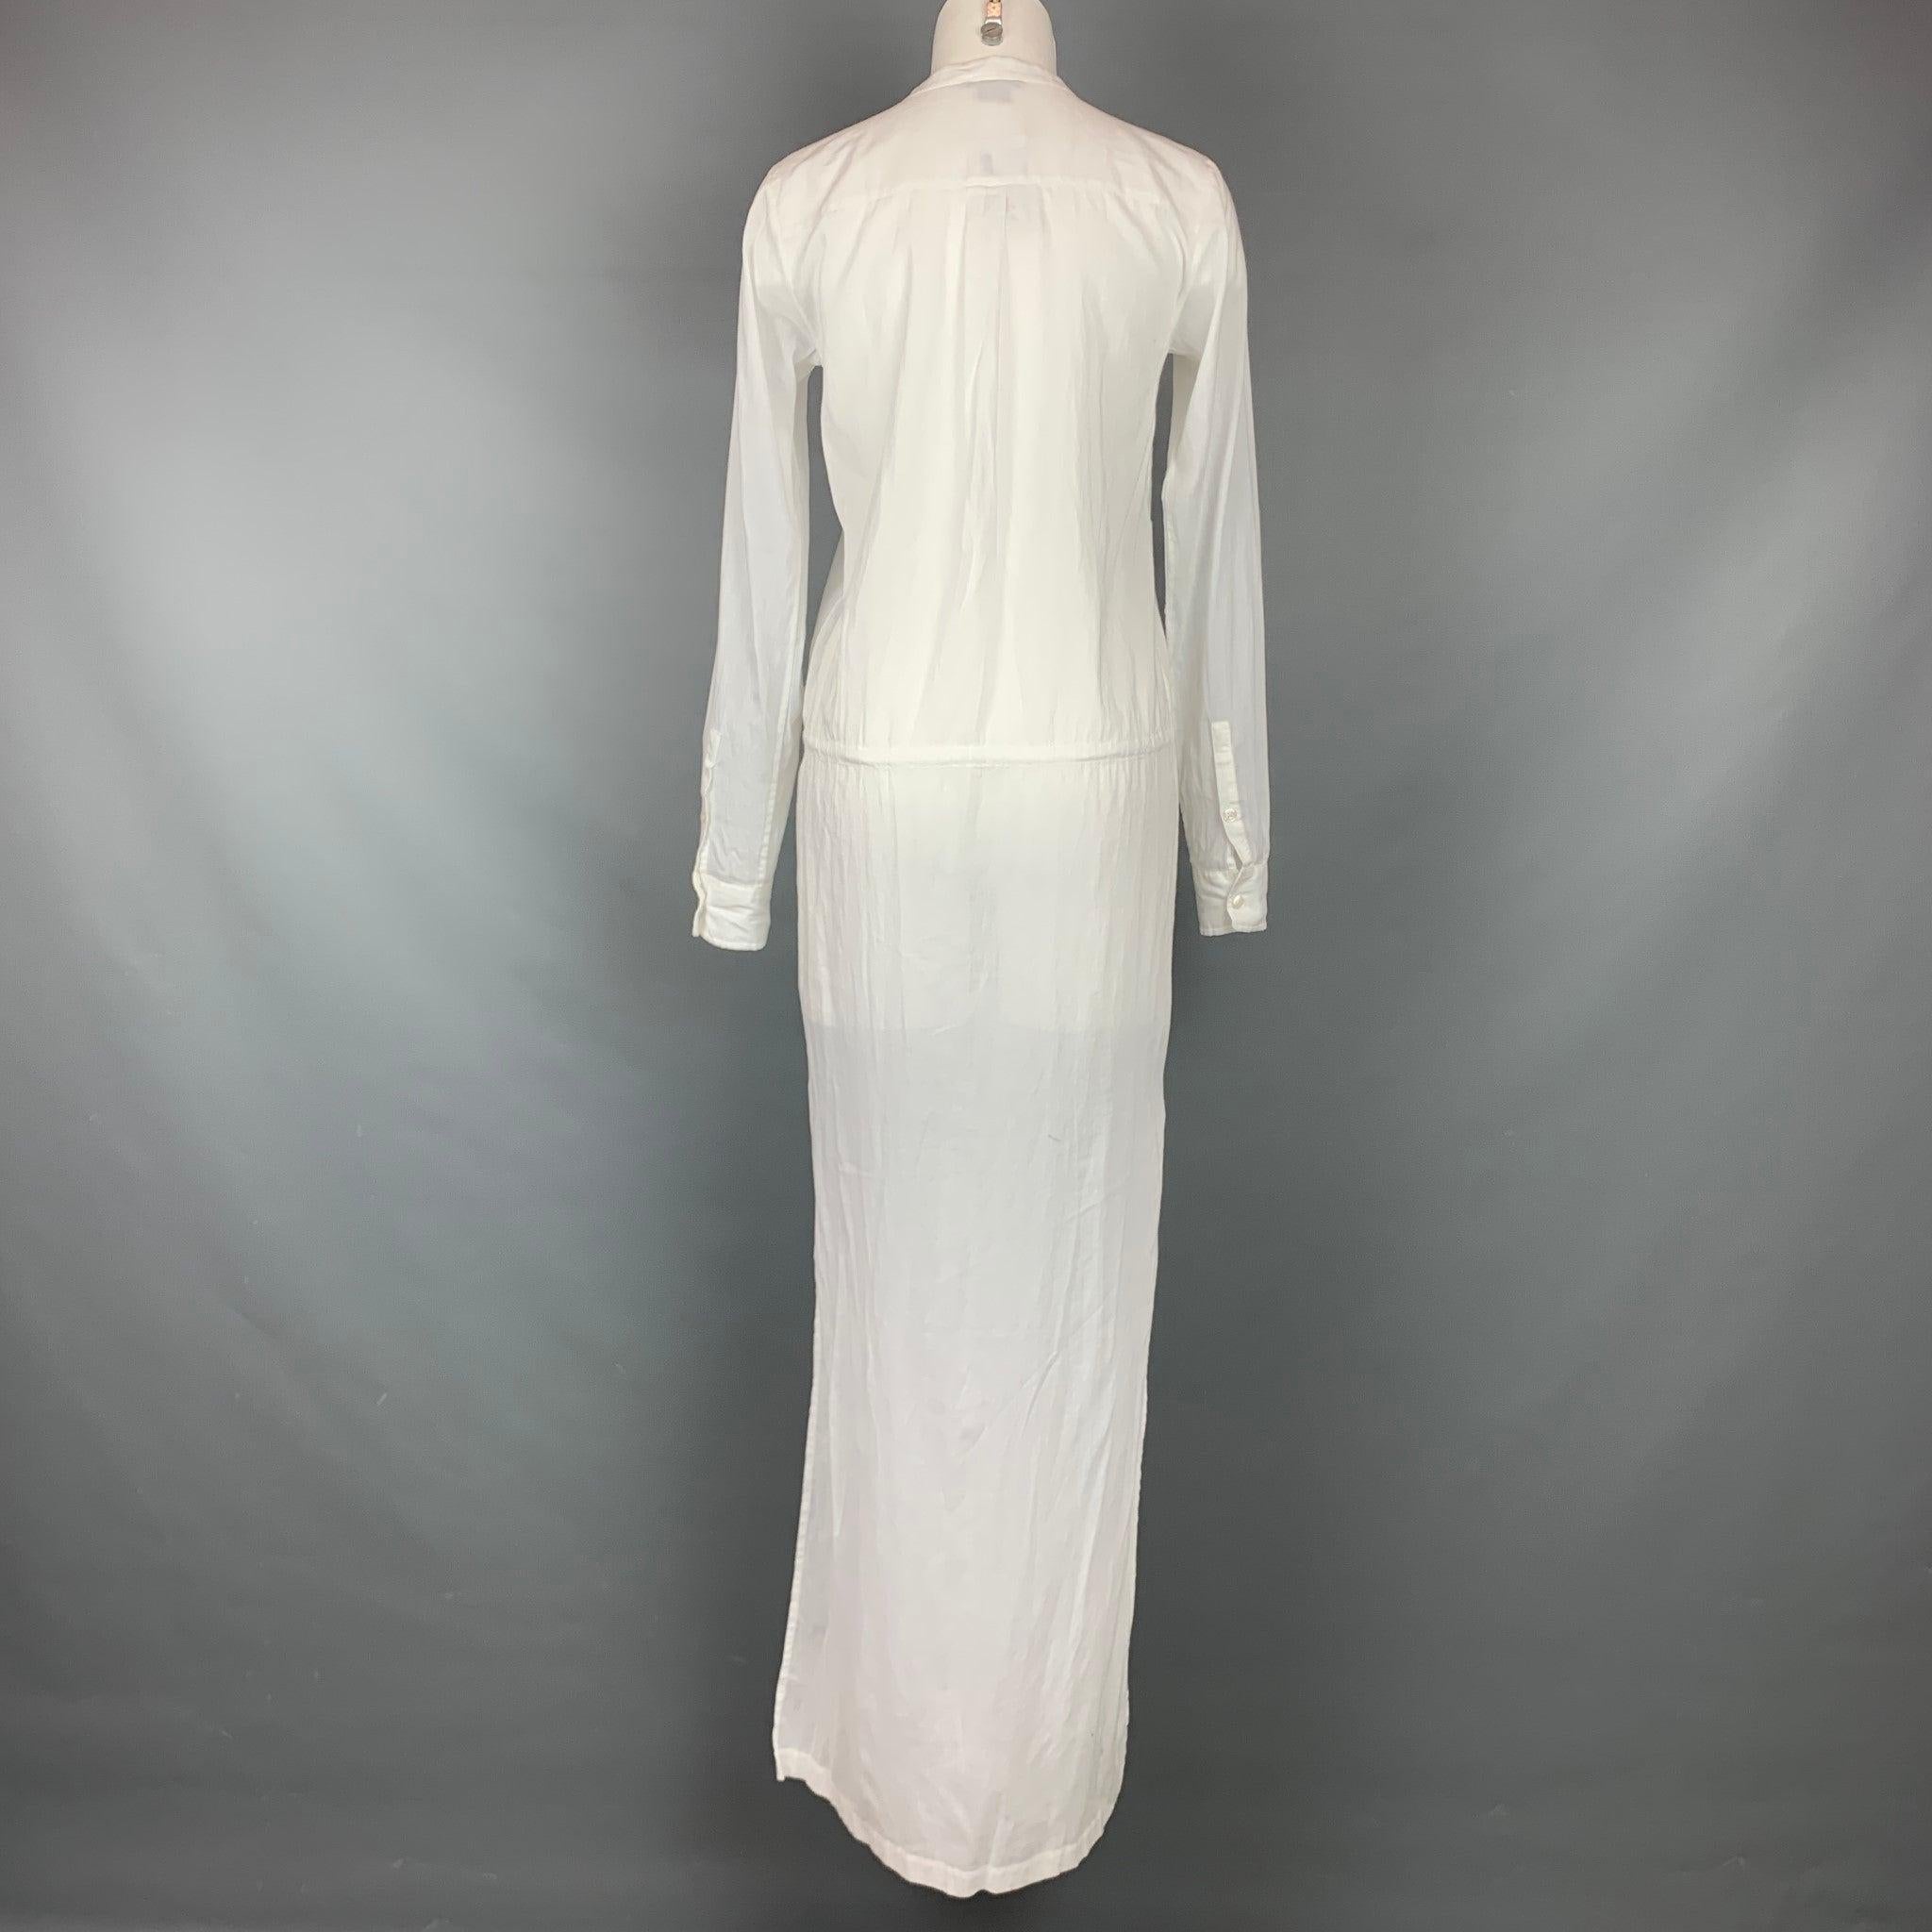 THEORY Size S White Cotton Long Shirt Dress In Excellent Condition For Sale In San Francisco, CA